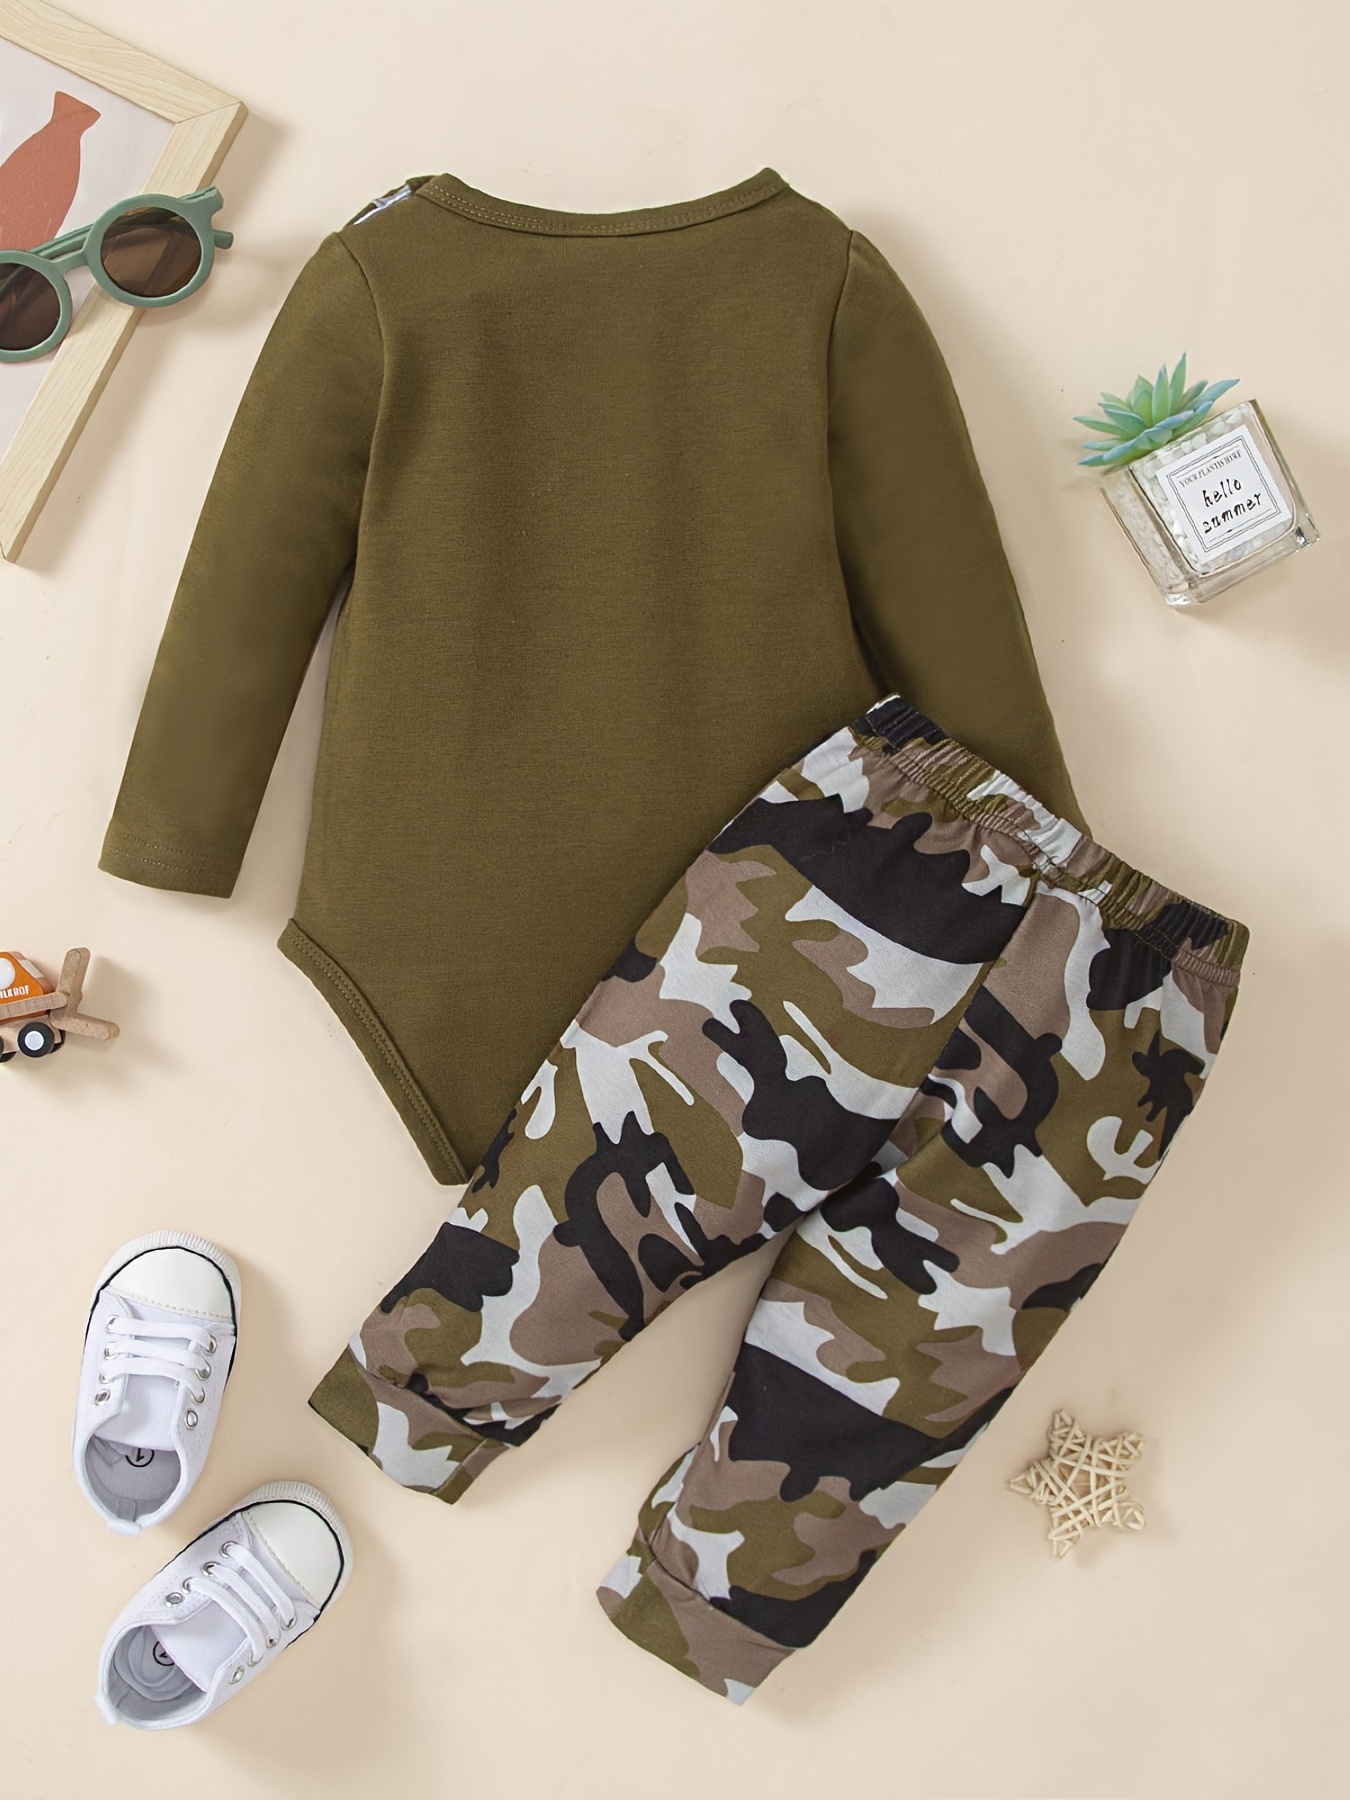  Boys Spring Outfits Girls Hooded Clothes Baby Print Camouflage  Boys Infant Jumpsuit Outfits Romper : Clothing, Shoes & Jewelry